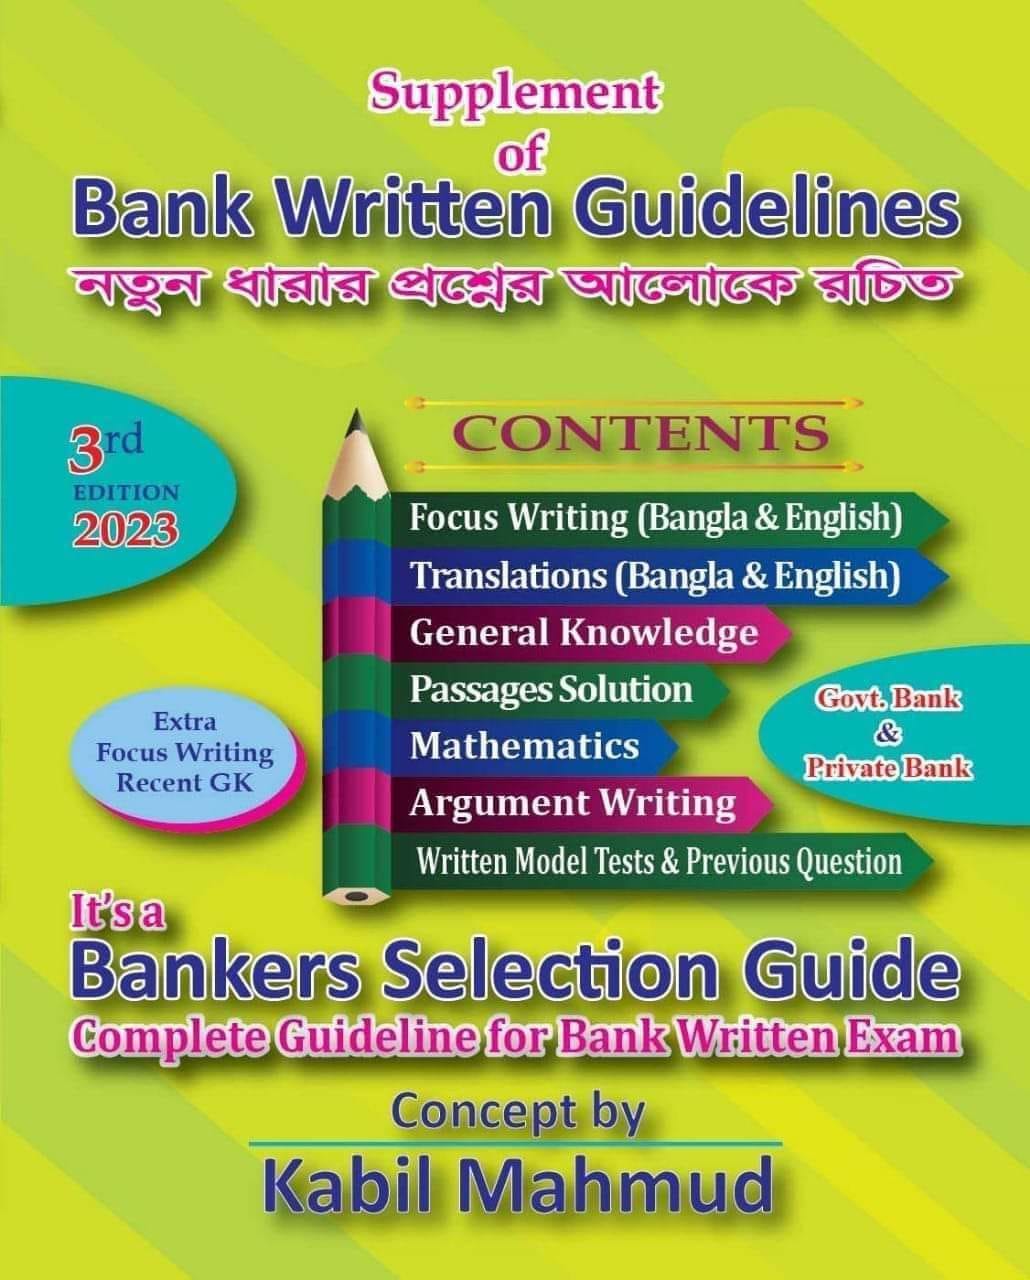 Supplement of Bank Written Guidelines by kabil Mahmud